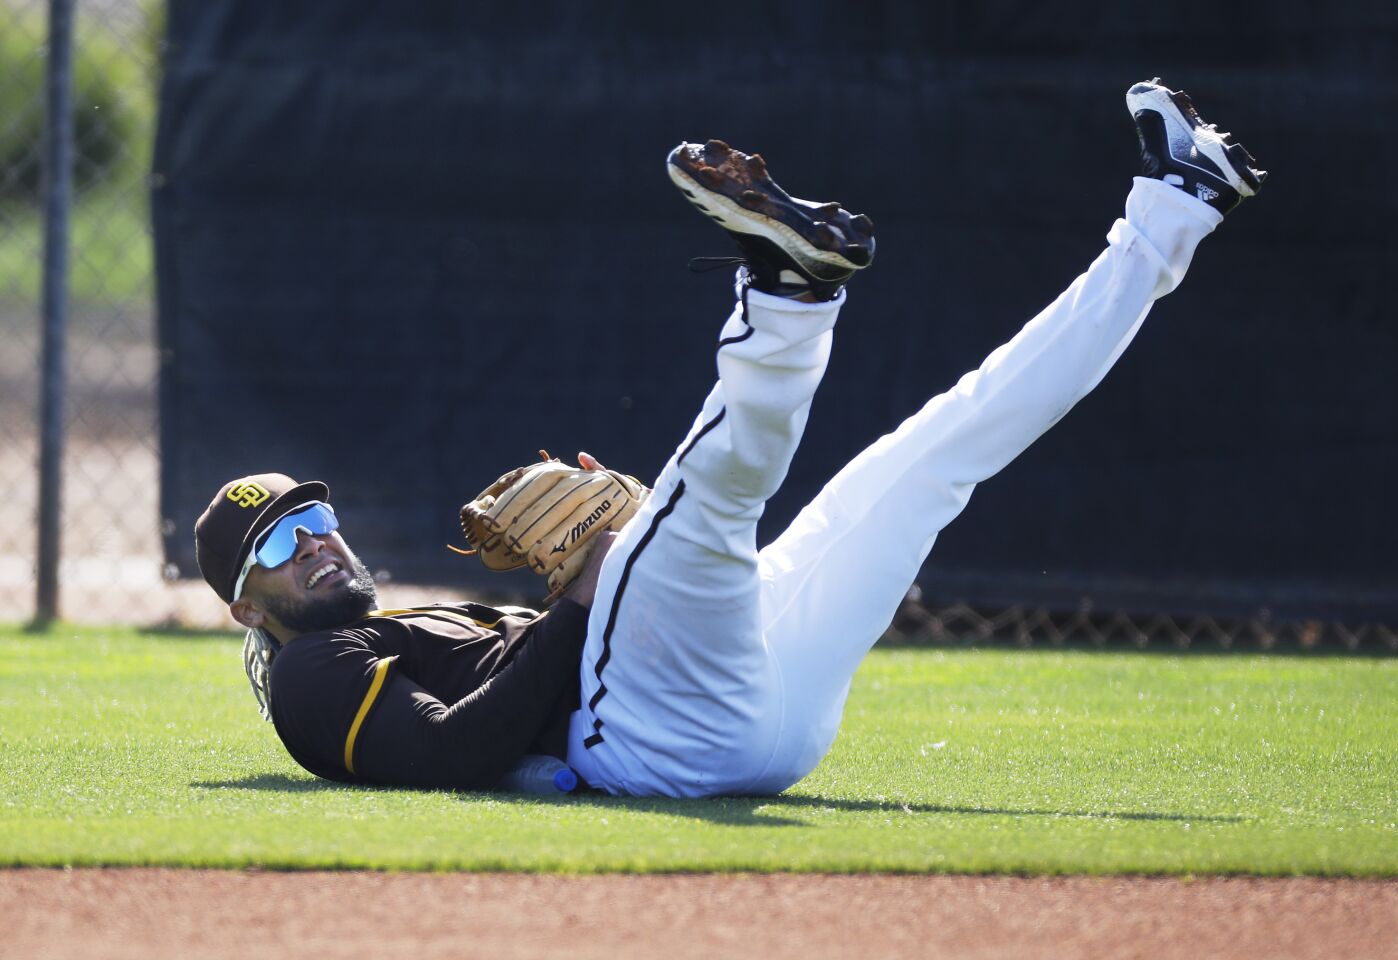 San Diego Padres Fernando Tatis. Jr makes a play during a spring training practice on Feb. 19, 2020.